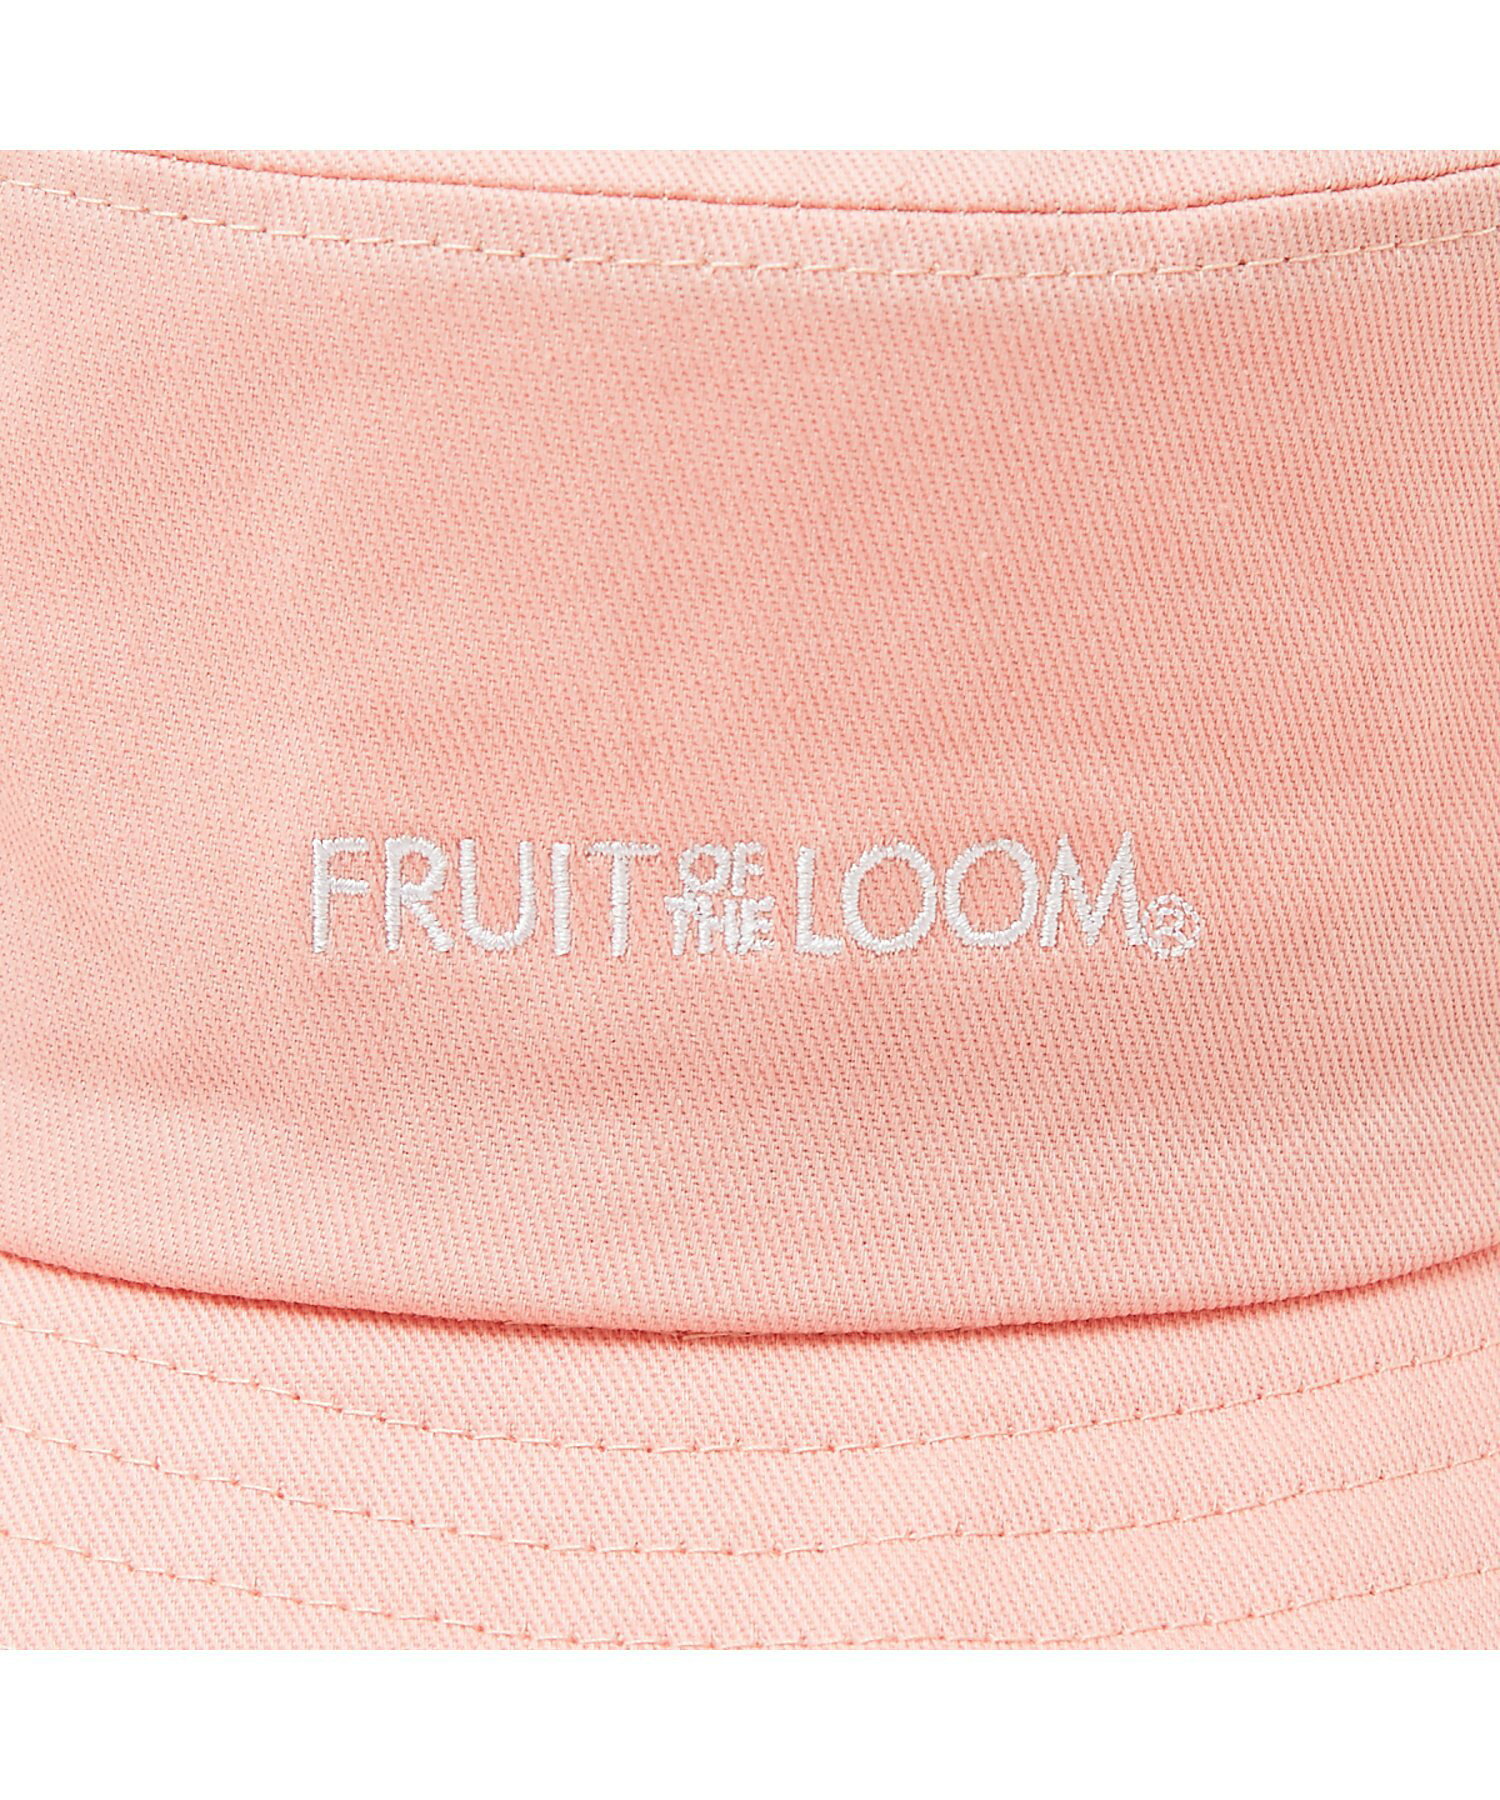 【FRUIT OF THE LOOM】フロントロゴ刺繍 ツイル バケット ハット